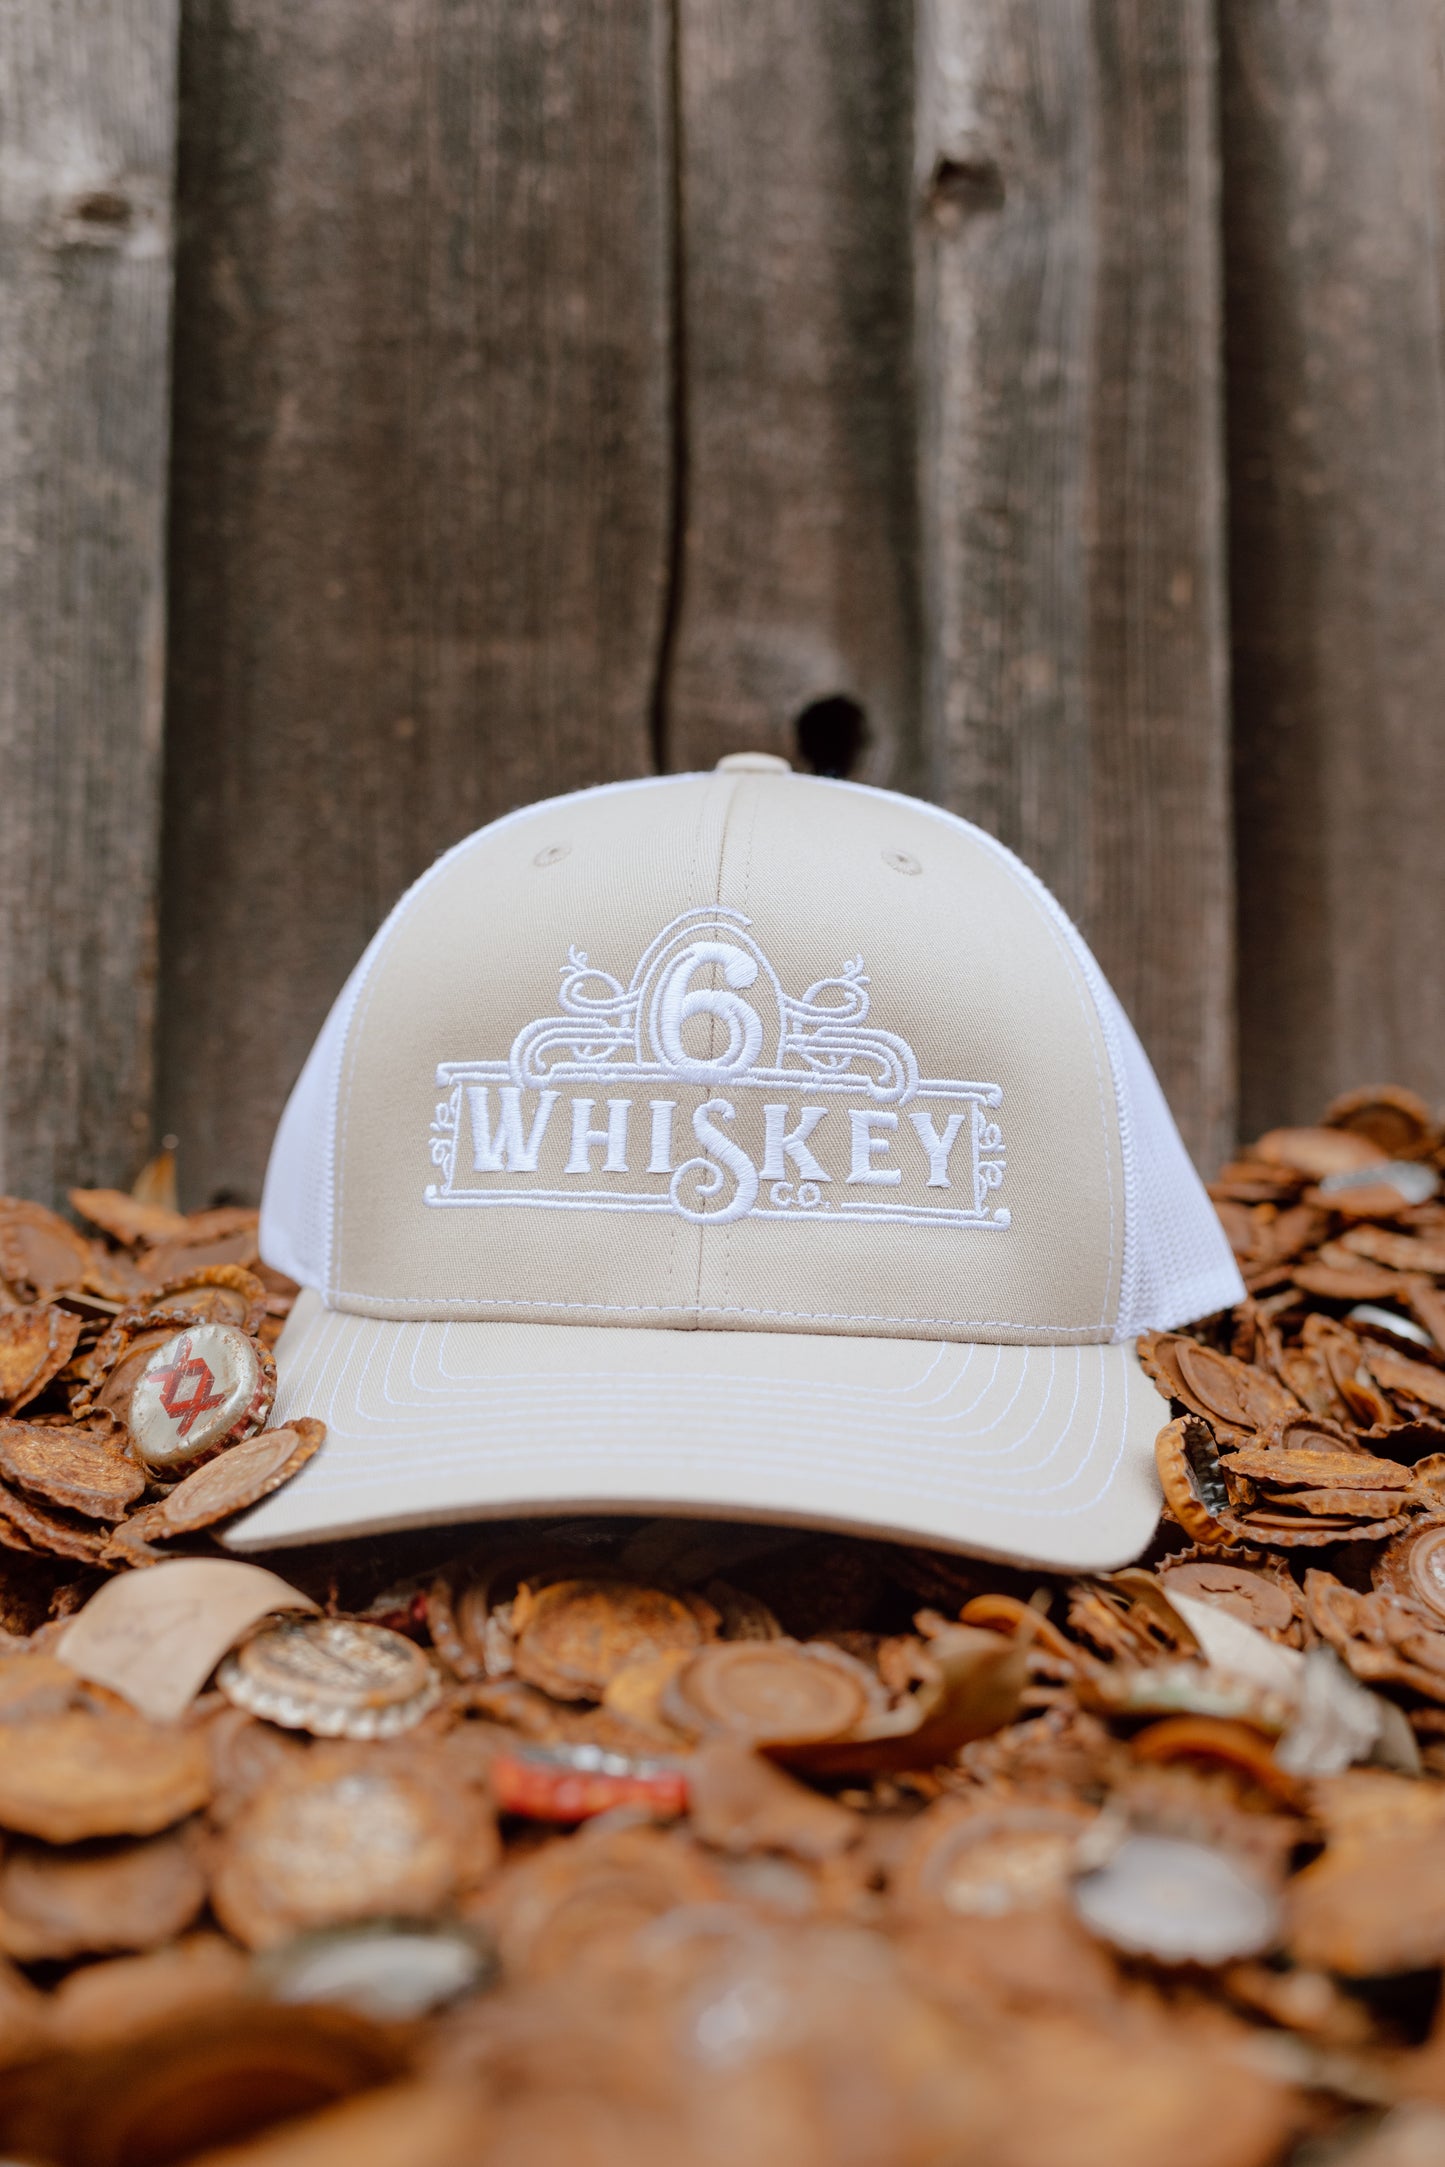 Gifts for Him – 6Whiskey Company